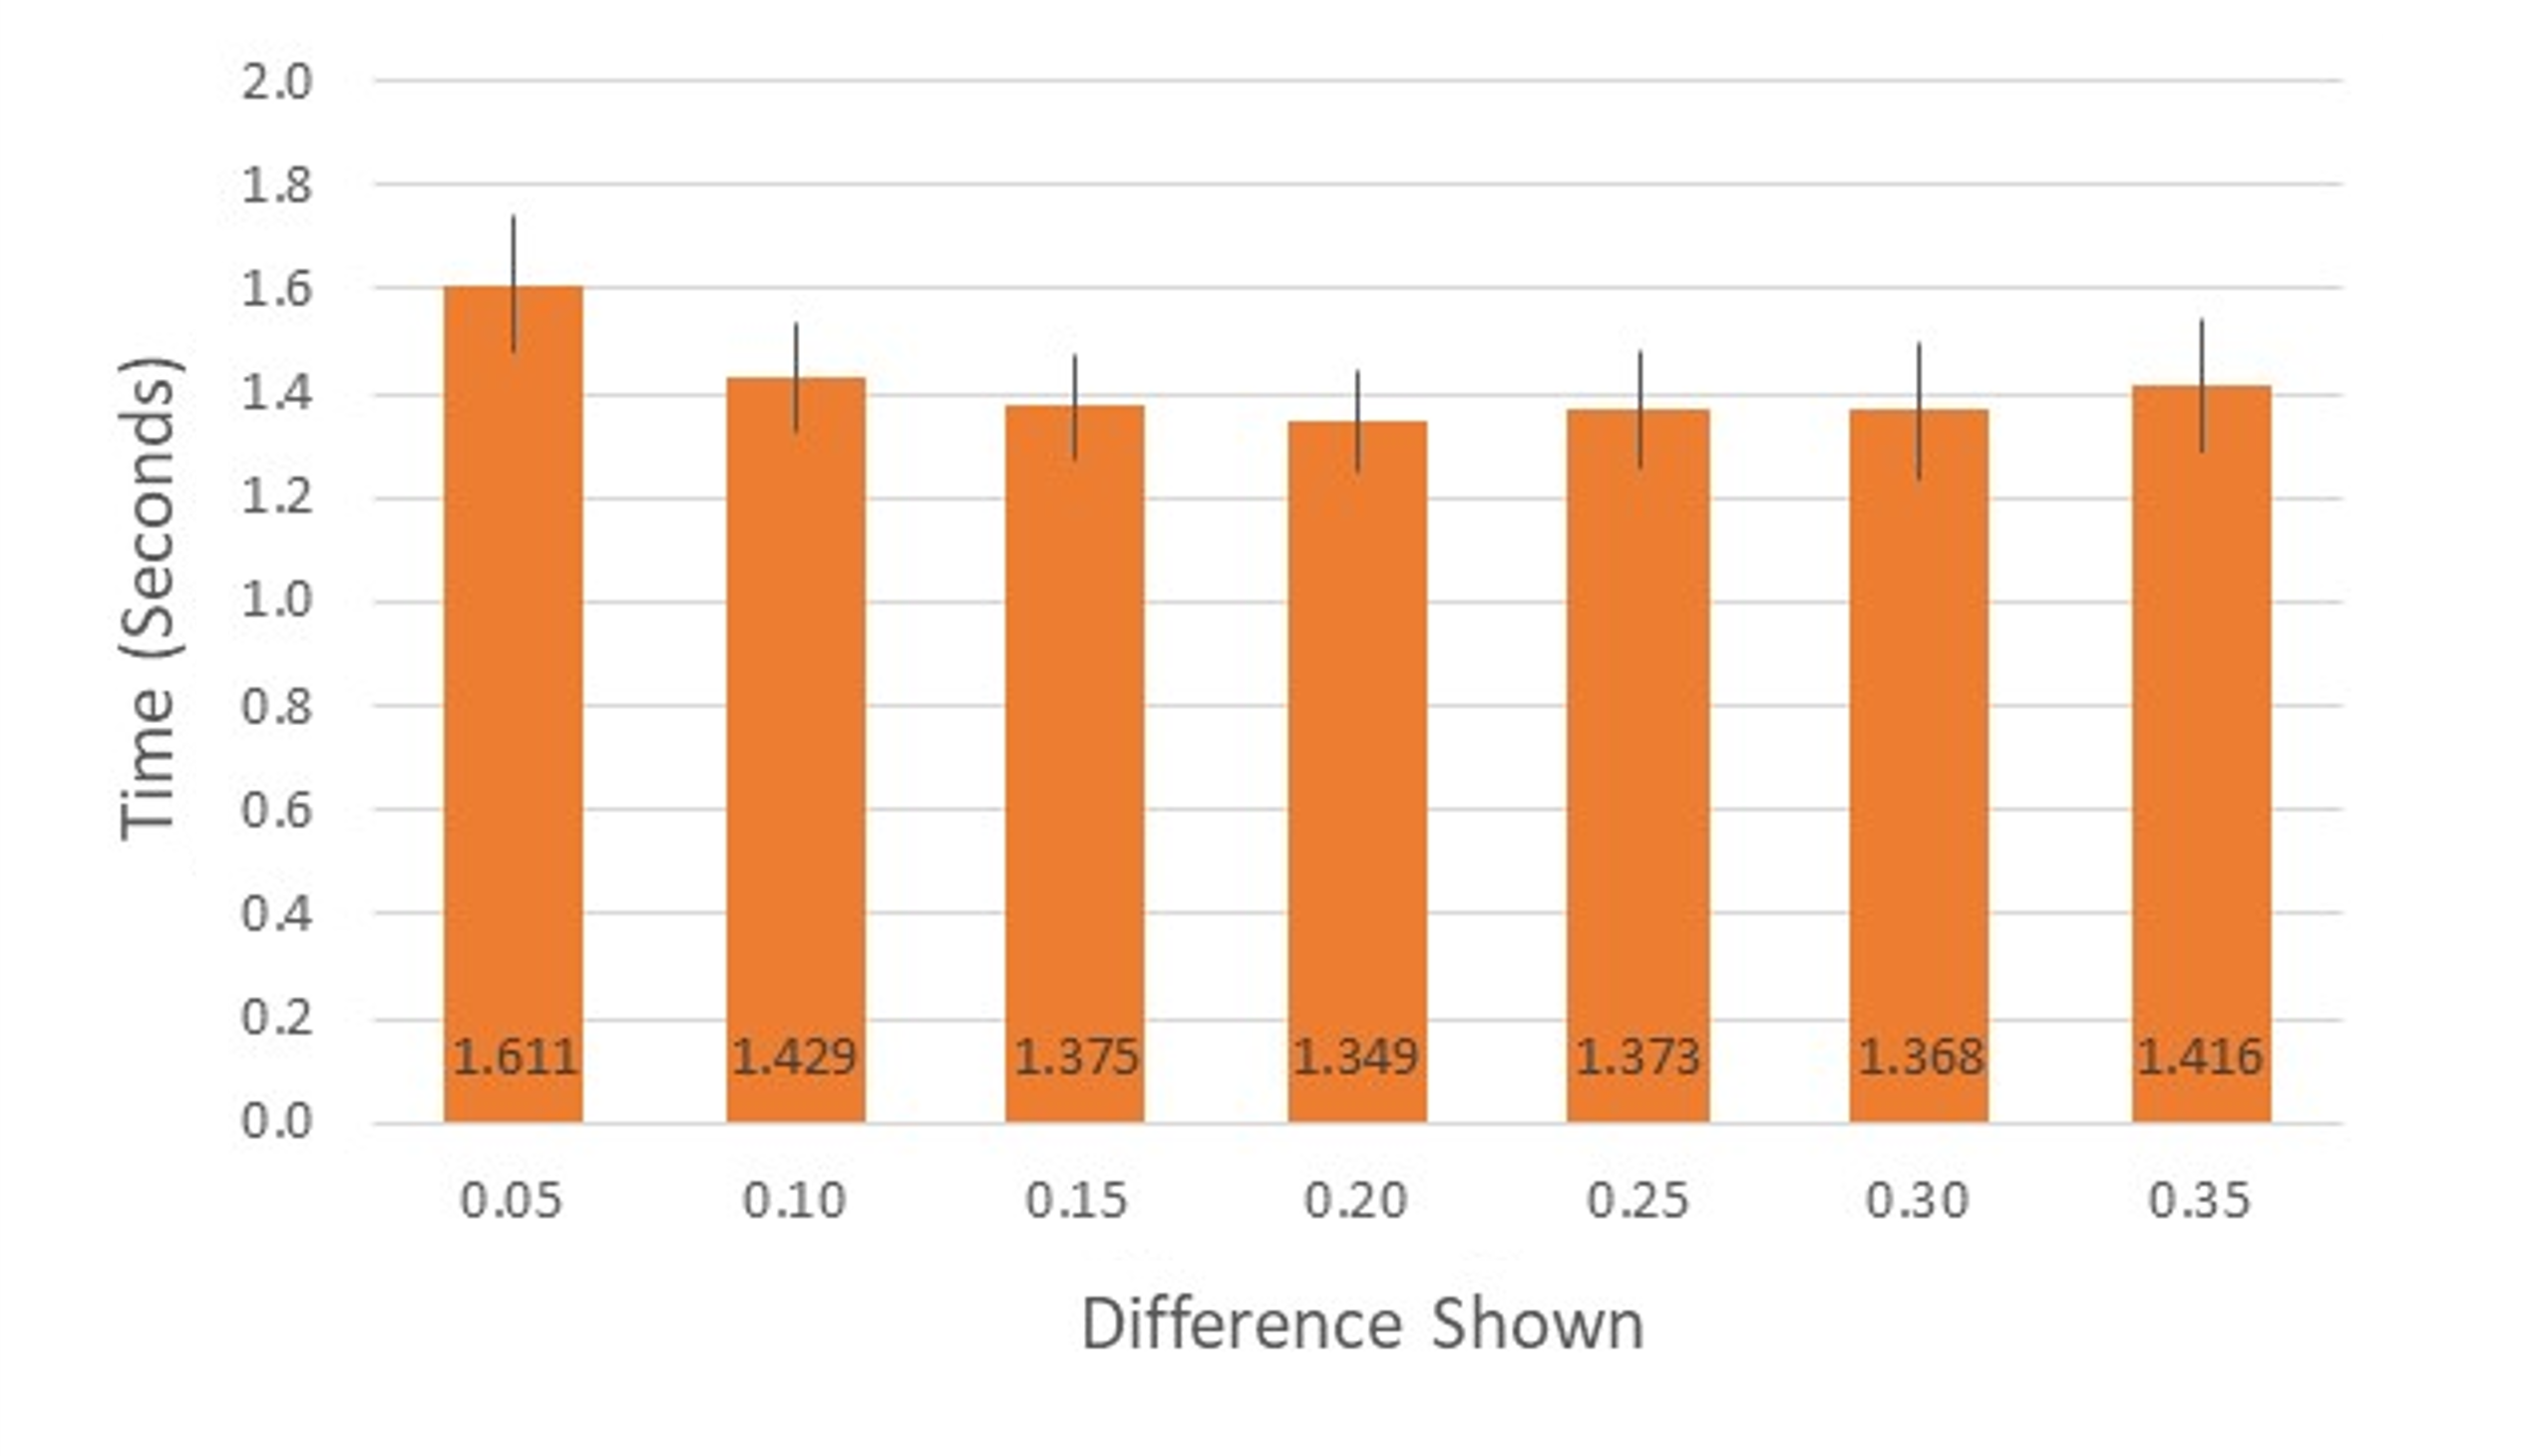 Selection times (means and 95% confidence intervals) for each difference across 2D and 3D graphs.